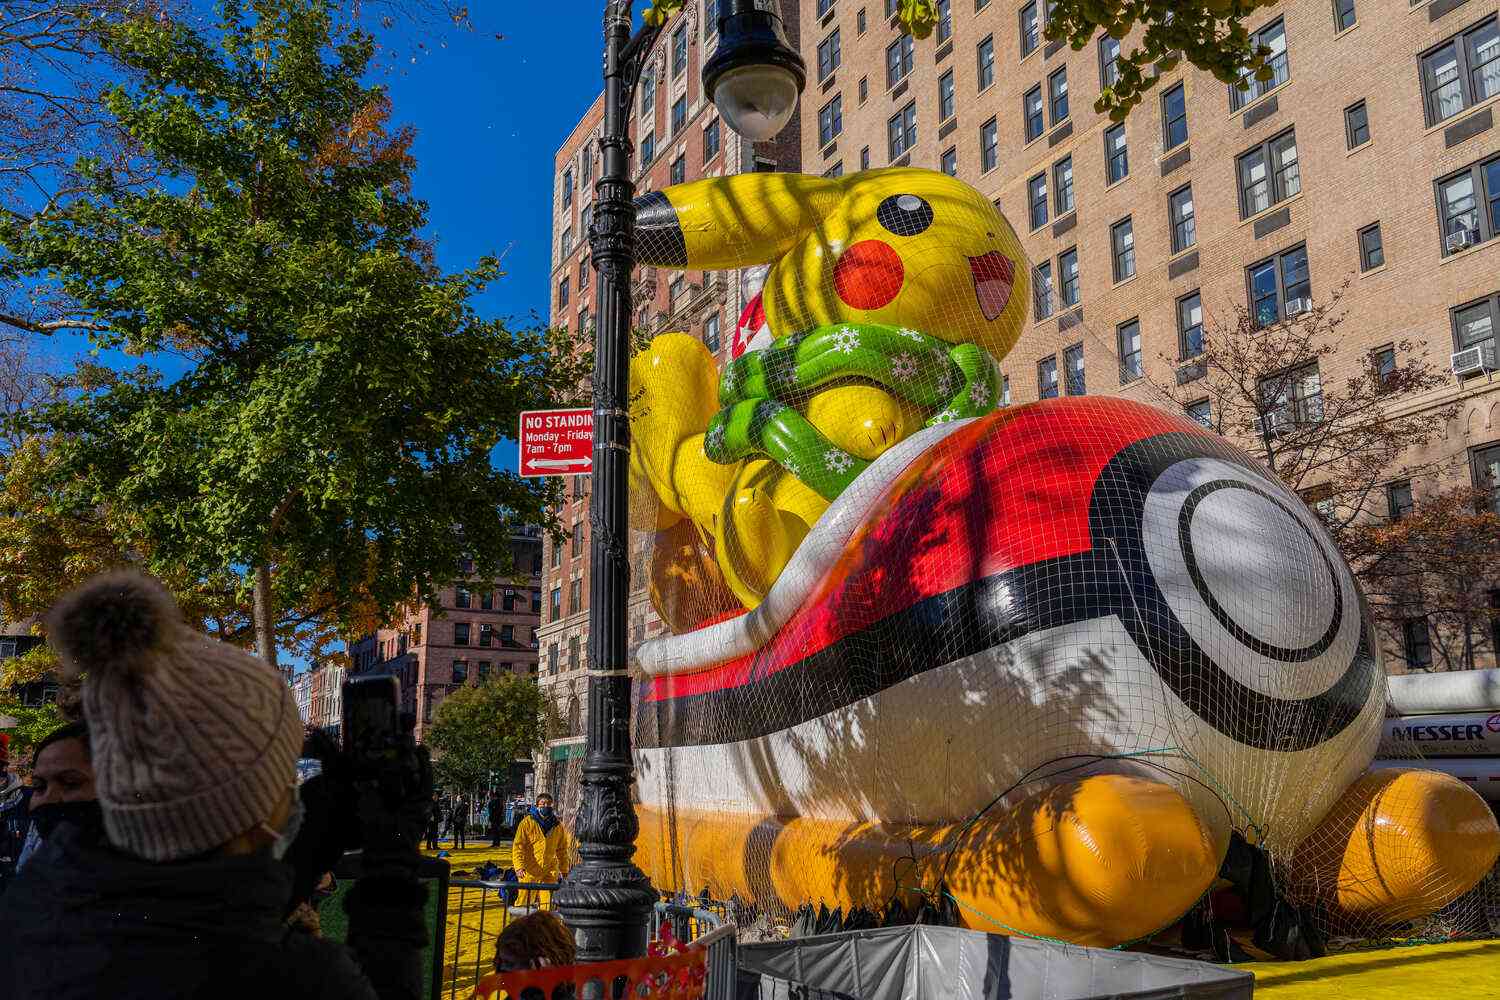 Macy's Thanksgiving Day Parade 2018